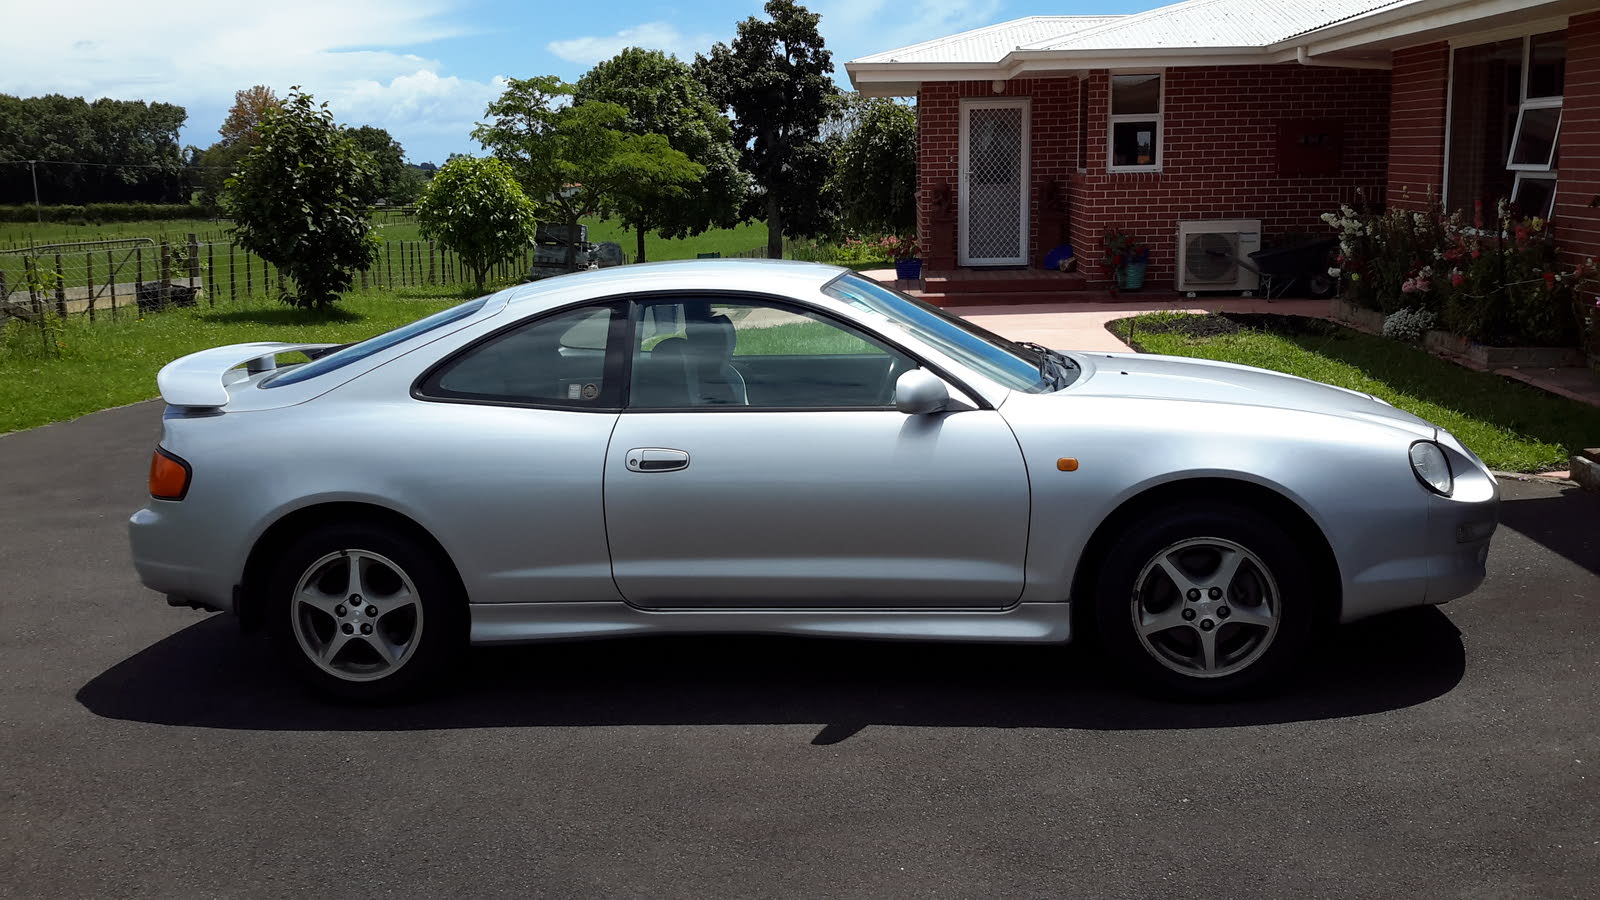 Toyota Celica Questions - Why are don't Celicas hold their value ...